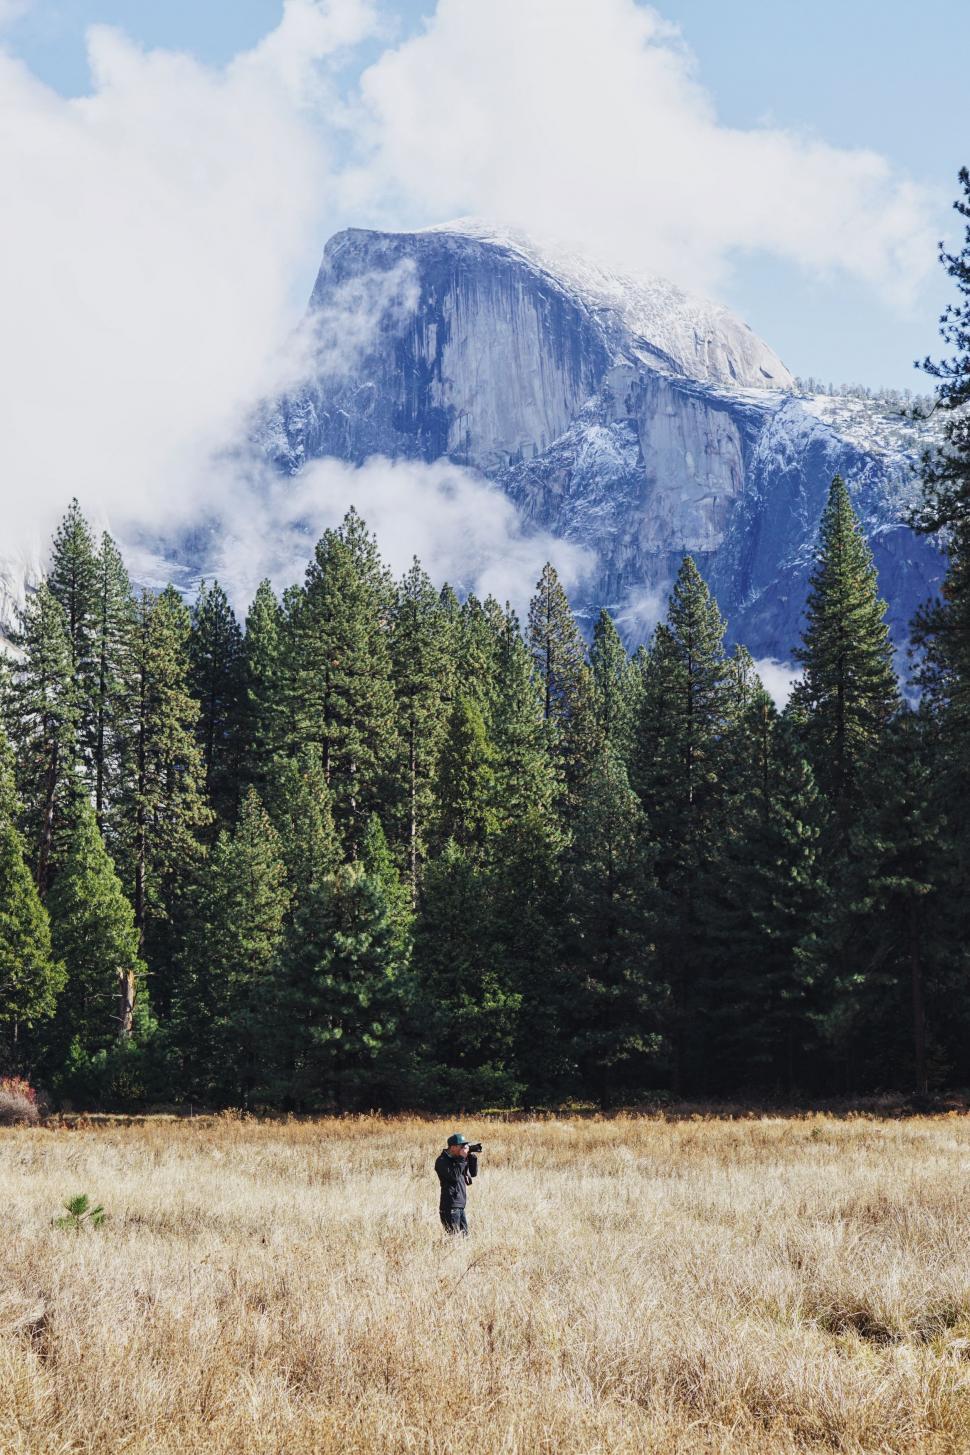 Free Image of Two People Standing in Field With Mountain Background 